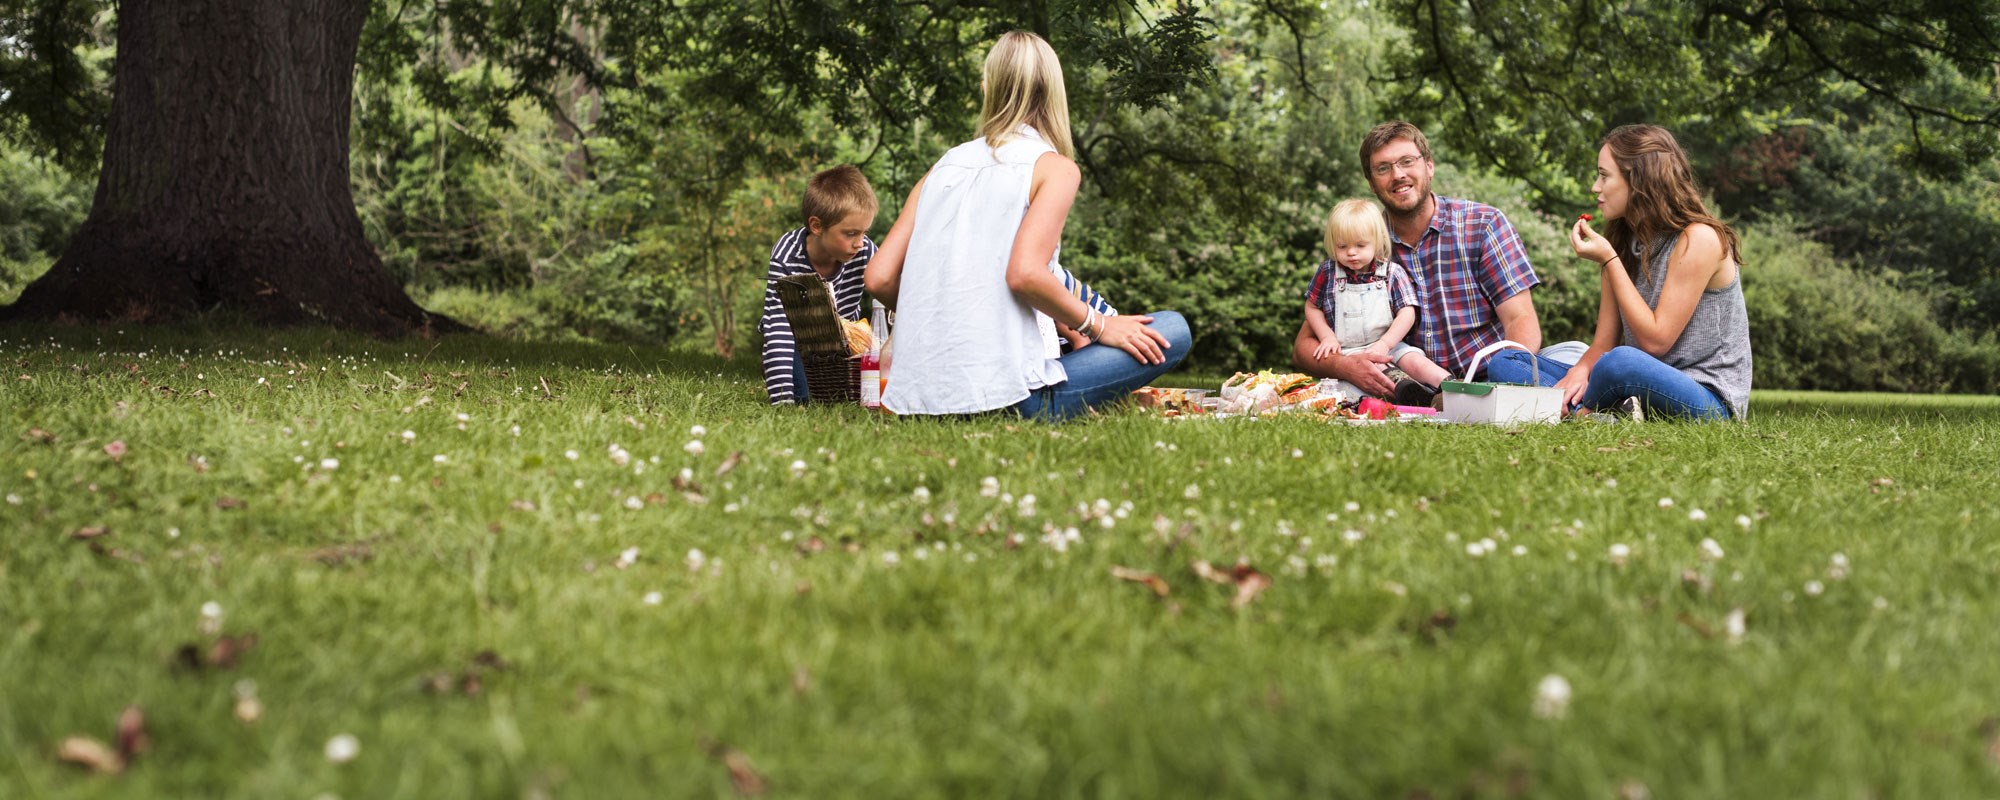 Family sat under a tree in a daisy filled field